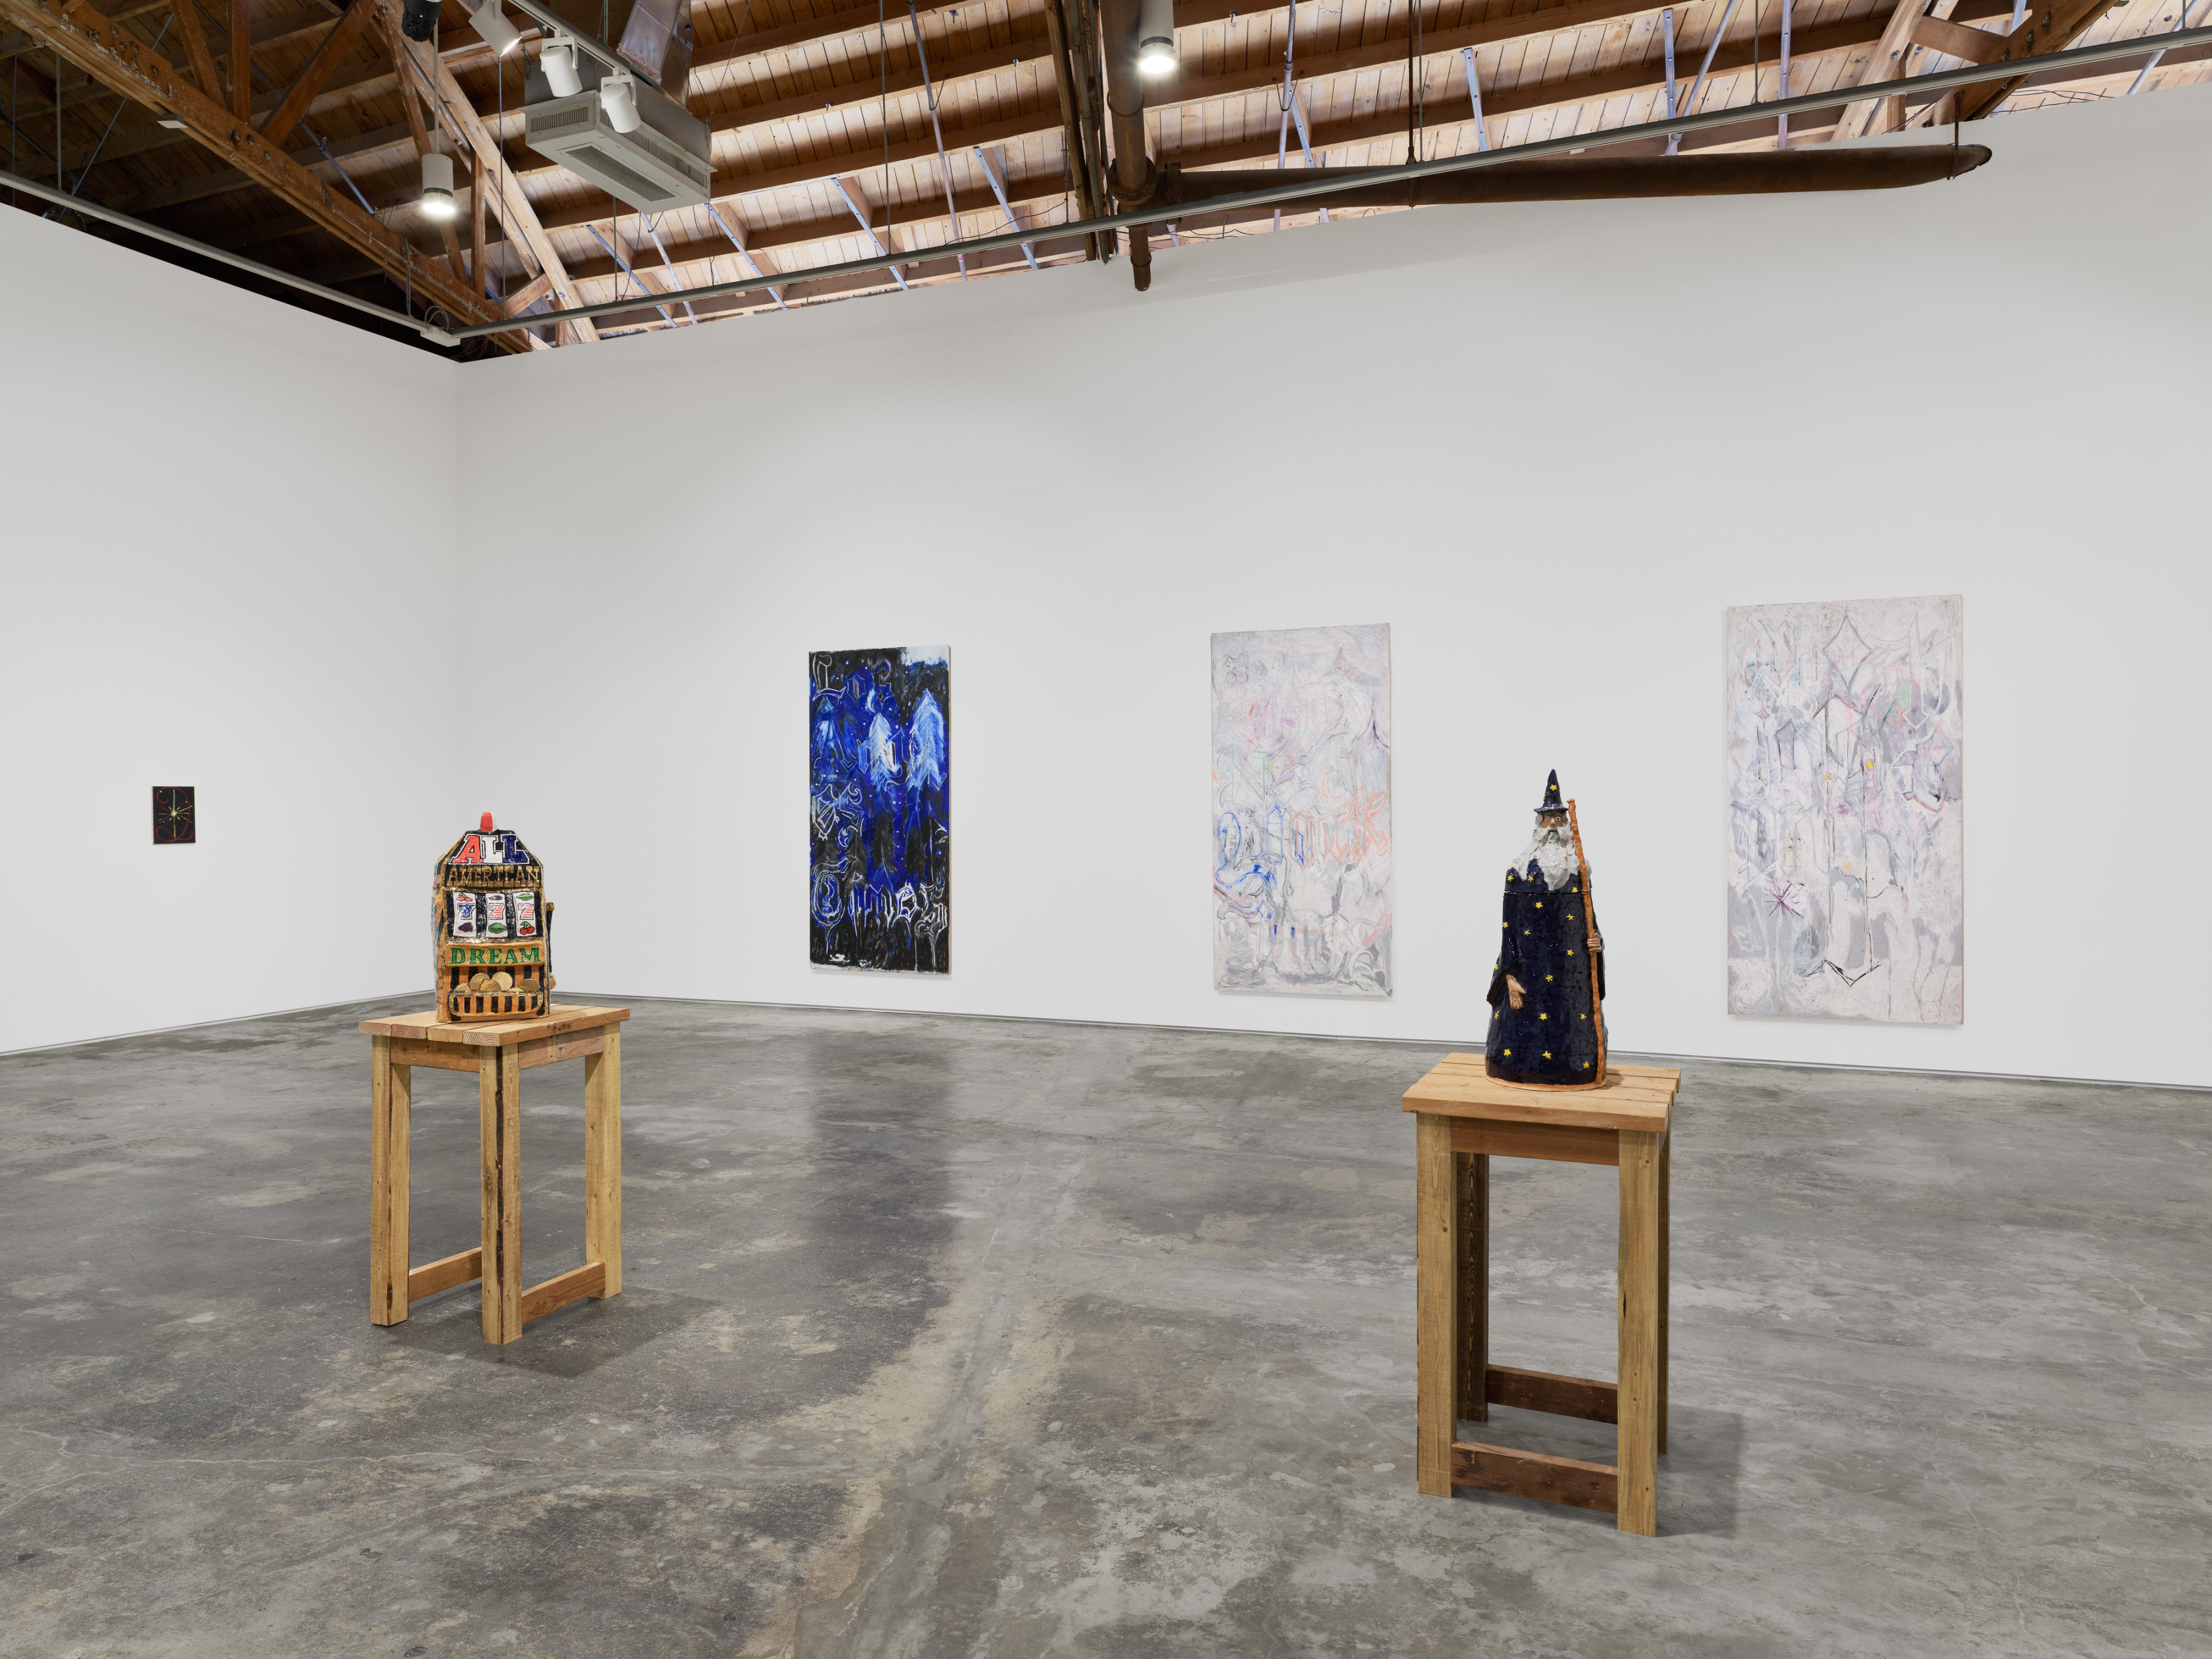 Installation view of "American Gothic”